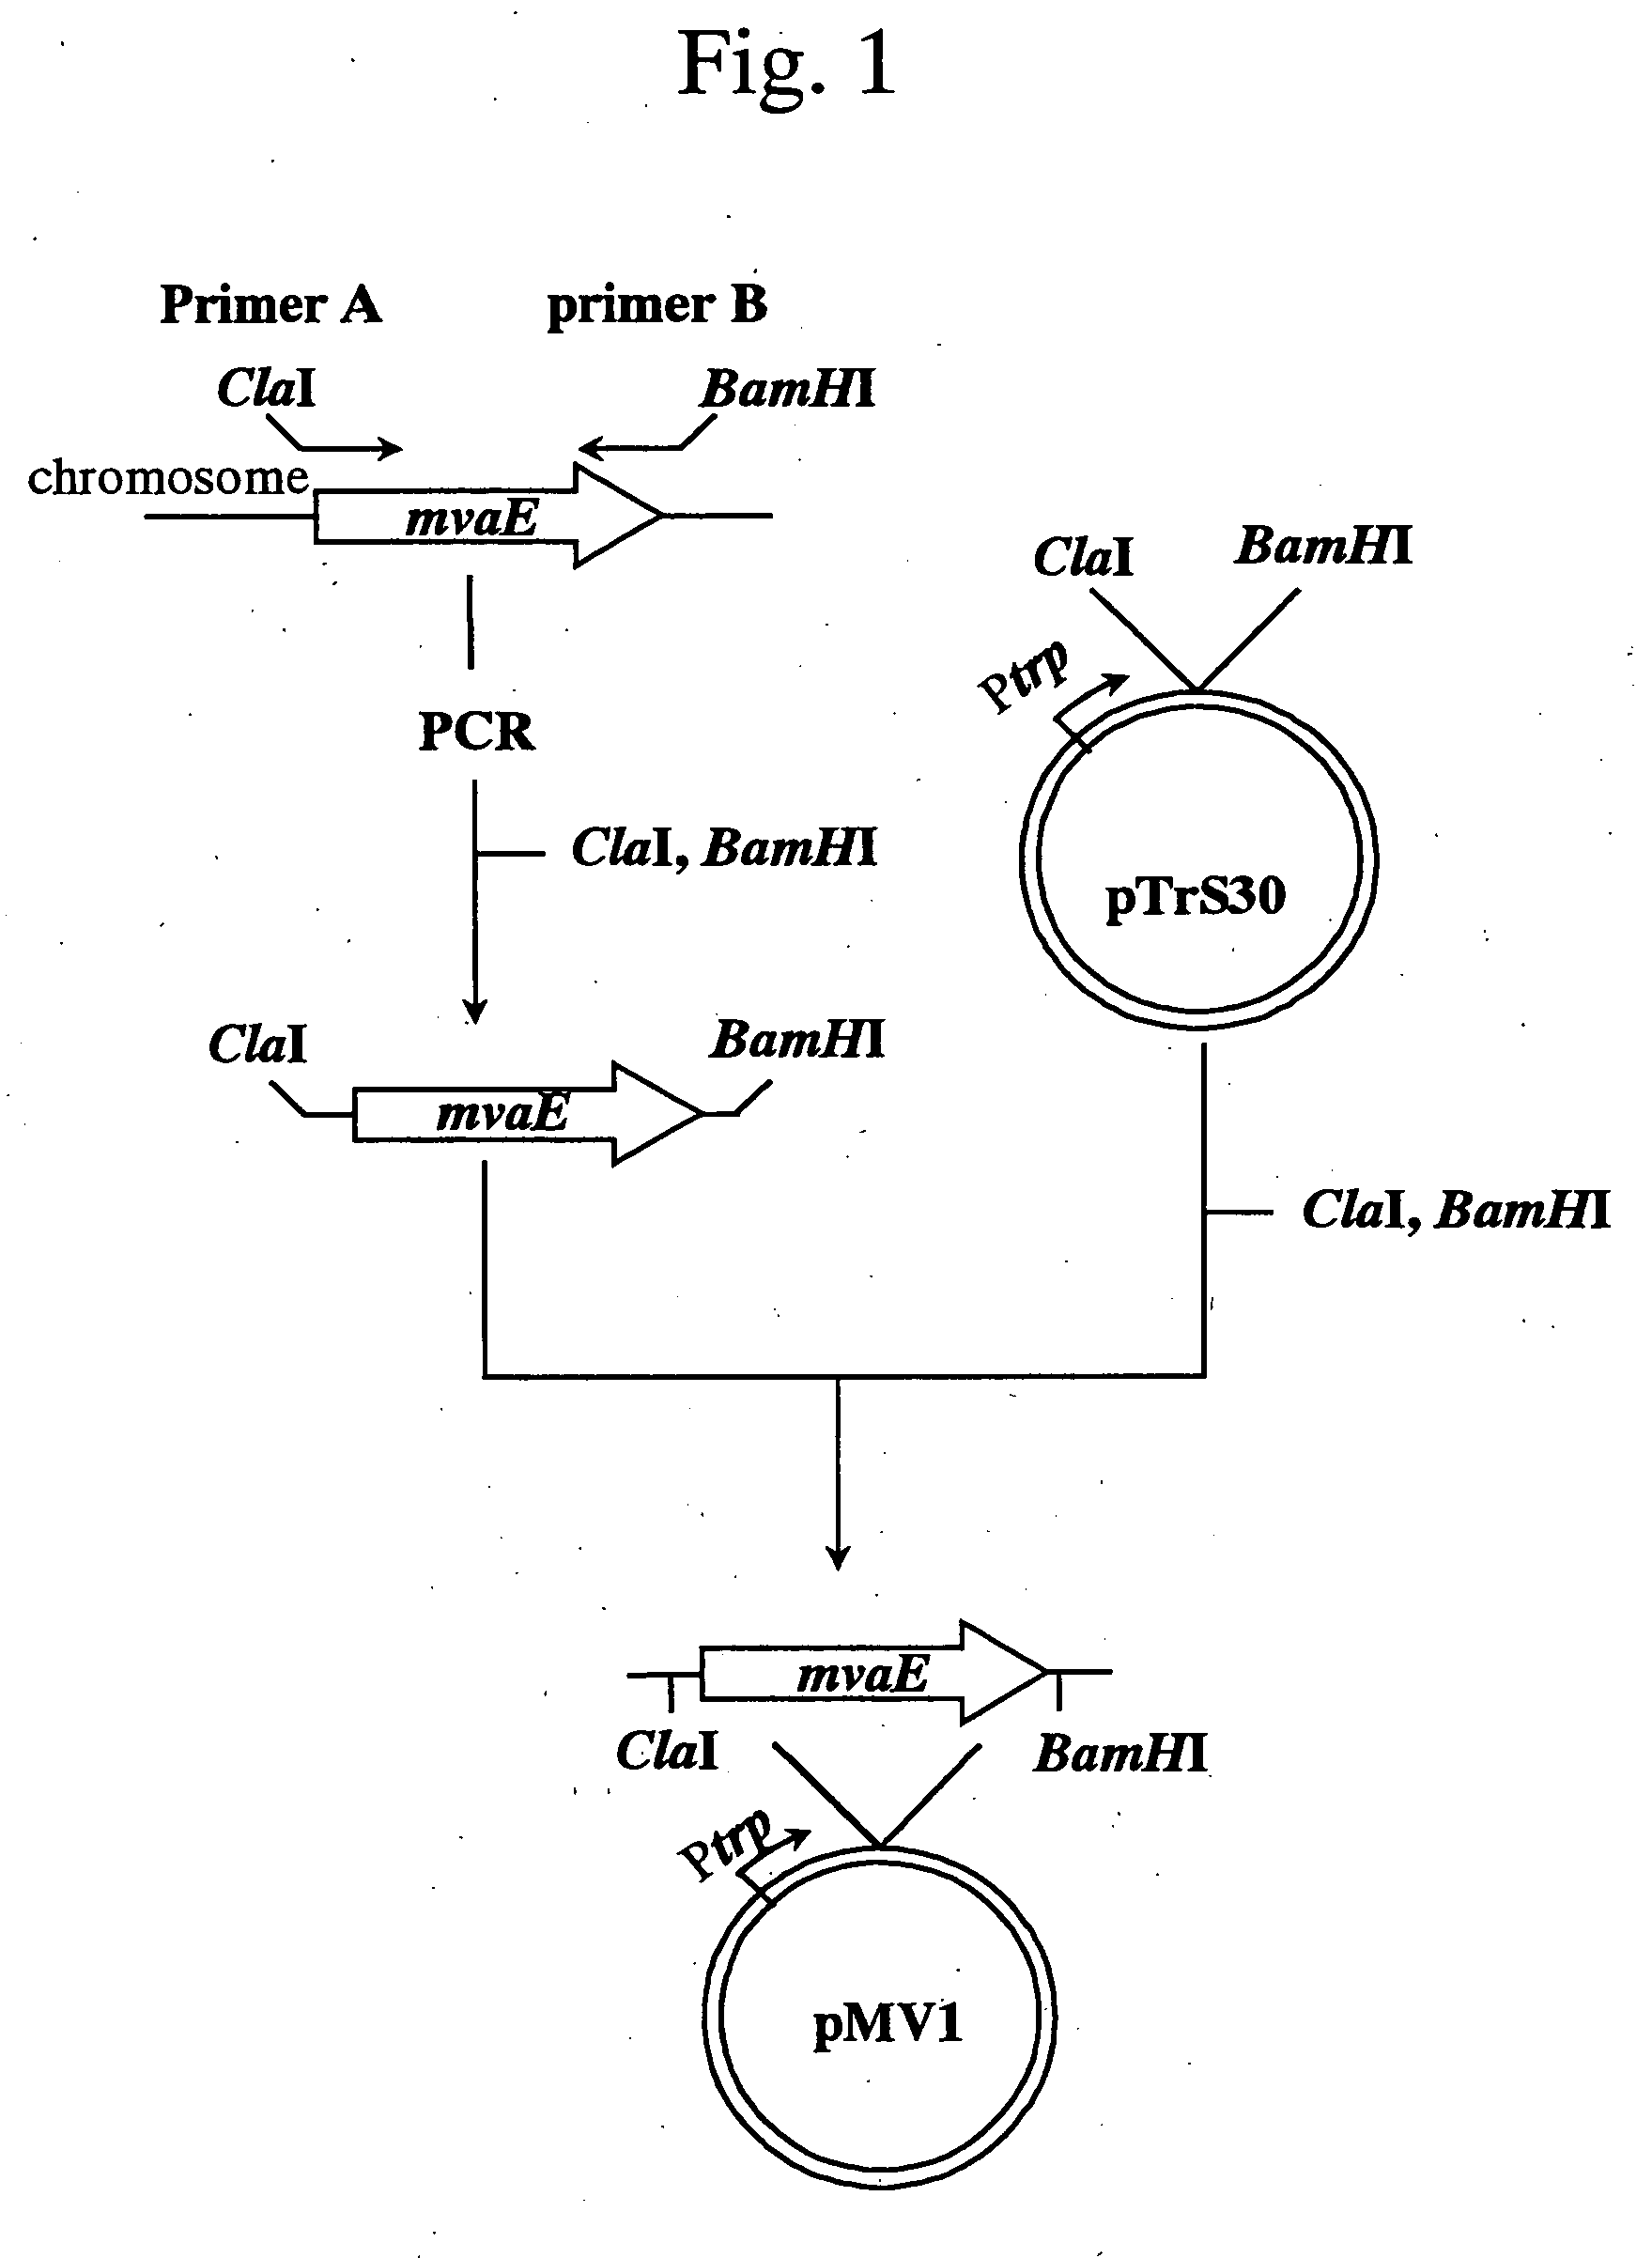 Process for producing mevalonic acid